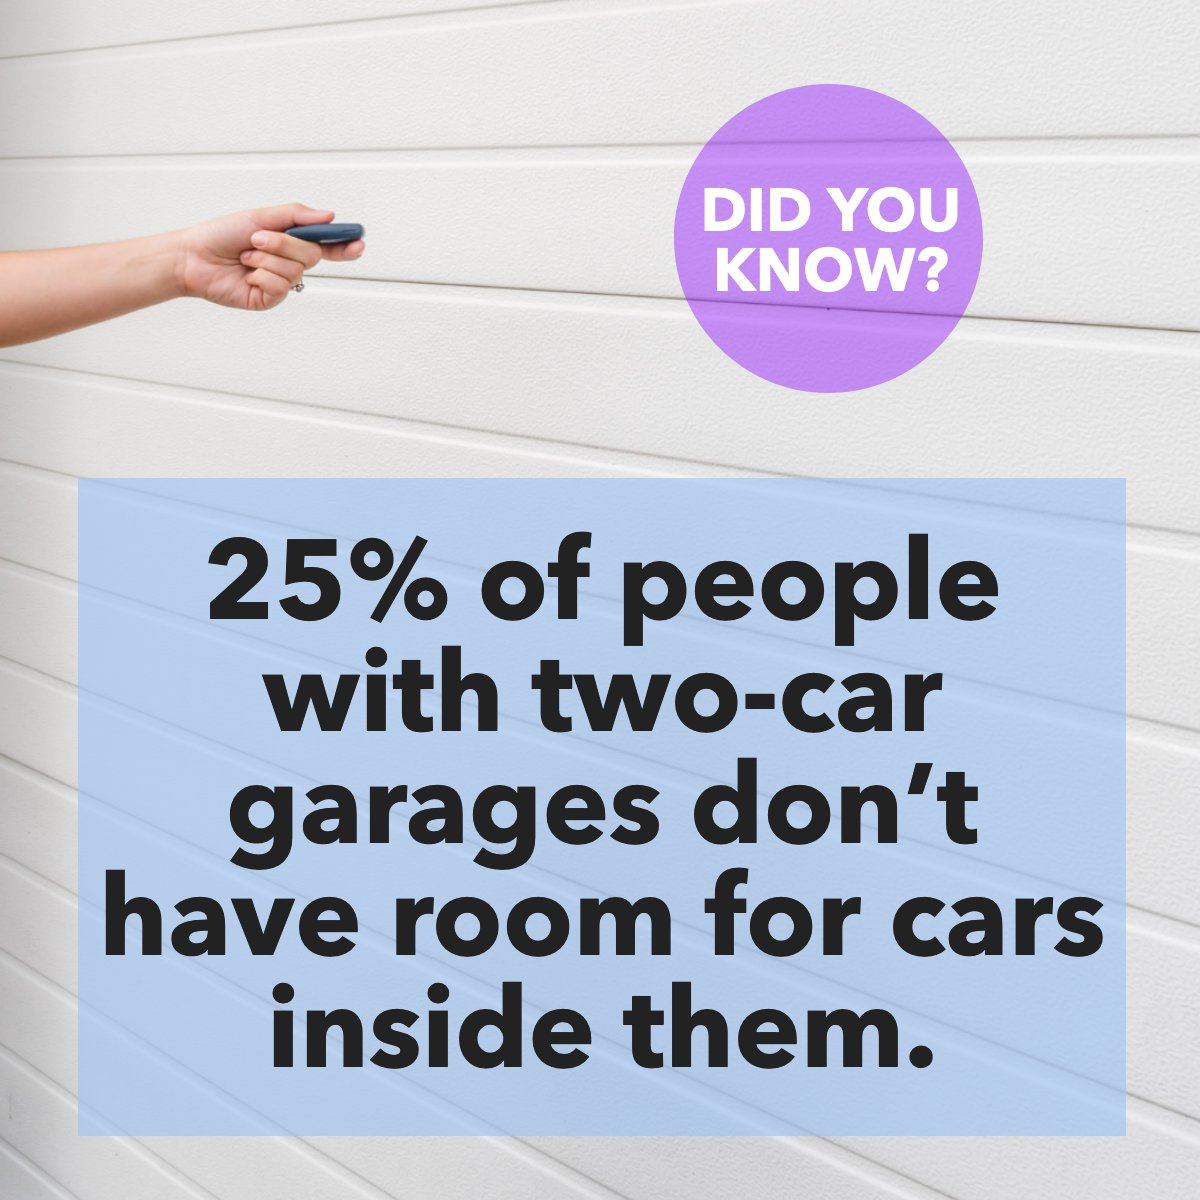 How much do you really know about garages and how they’re actually used by homeowners? 🤔

Let us know below!

#realestatefacts #didyouknow #realestate101 #garage #homeowners 
 #RiversideRealestate #RiversideHomes #RiversideBroker #JamesCottrell #jamesforhomes